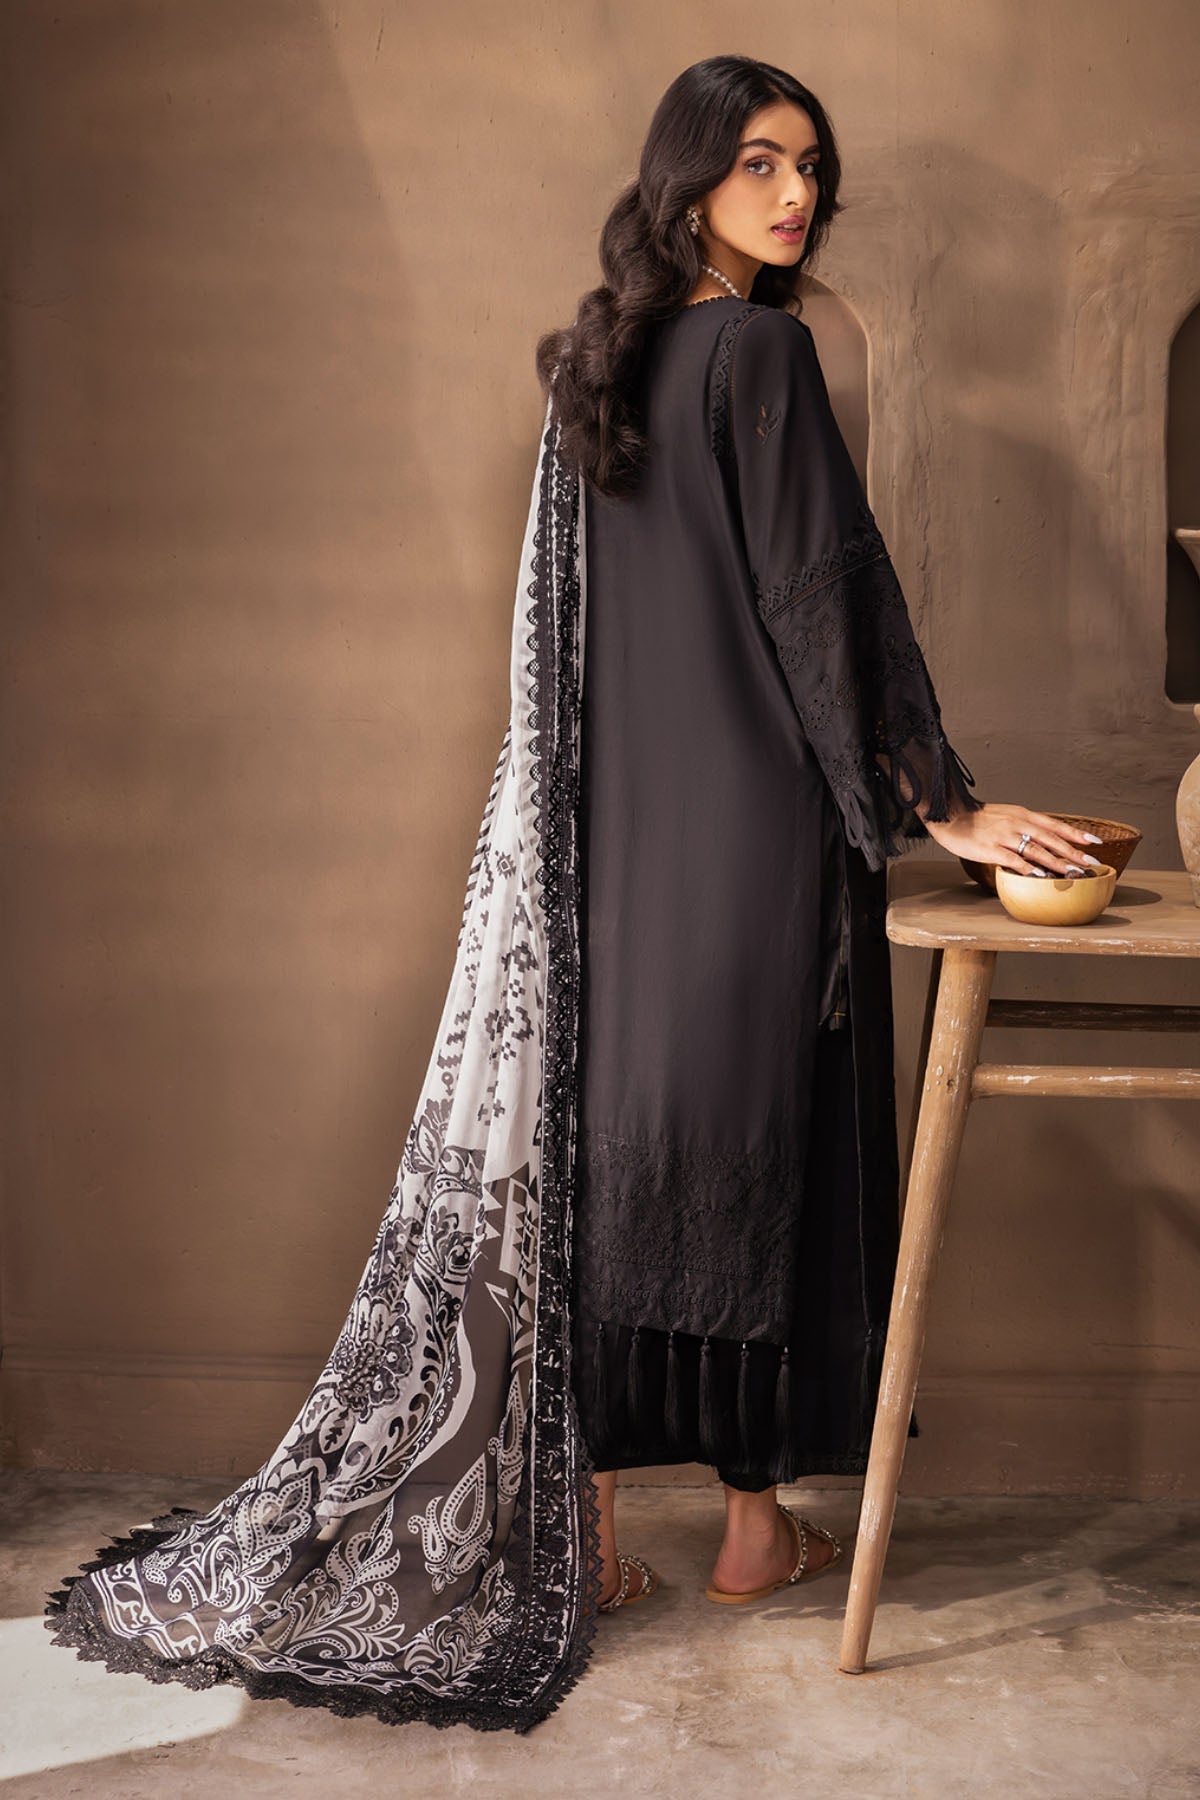 Buy Now, KOYAL - Monochrome Collection 2023 - Nureh - Shahana Collection UK - Wedding and Bridal Party Dresses 